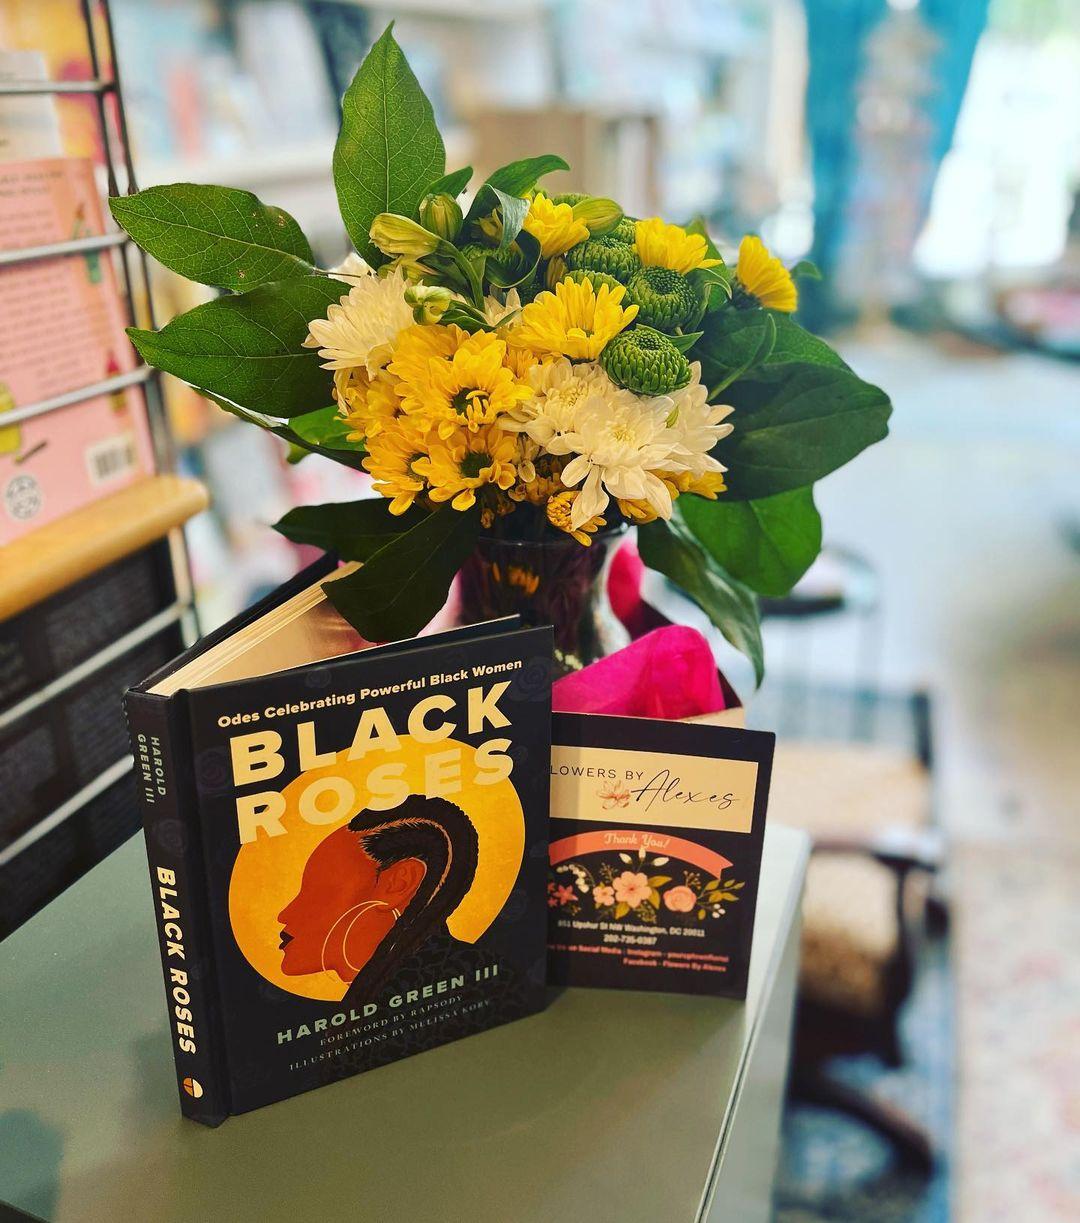 class="content__text"
 Some days are harder than other and what keeps us going? The community! Shout out to @youruptownflorist for this beautiful, bright bouquet and for being lovely neighbors! We also love this uplifting book Black Roses by @haroldgreen celebrating US. Shouts to the joys that keep us going! 
 